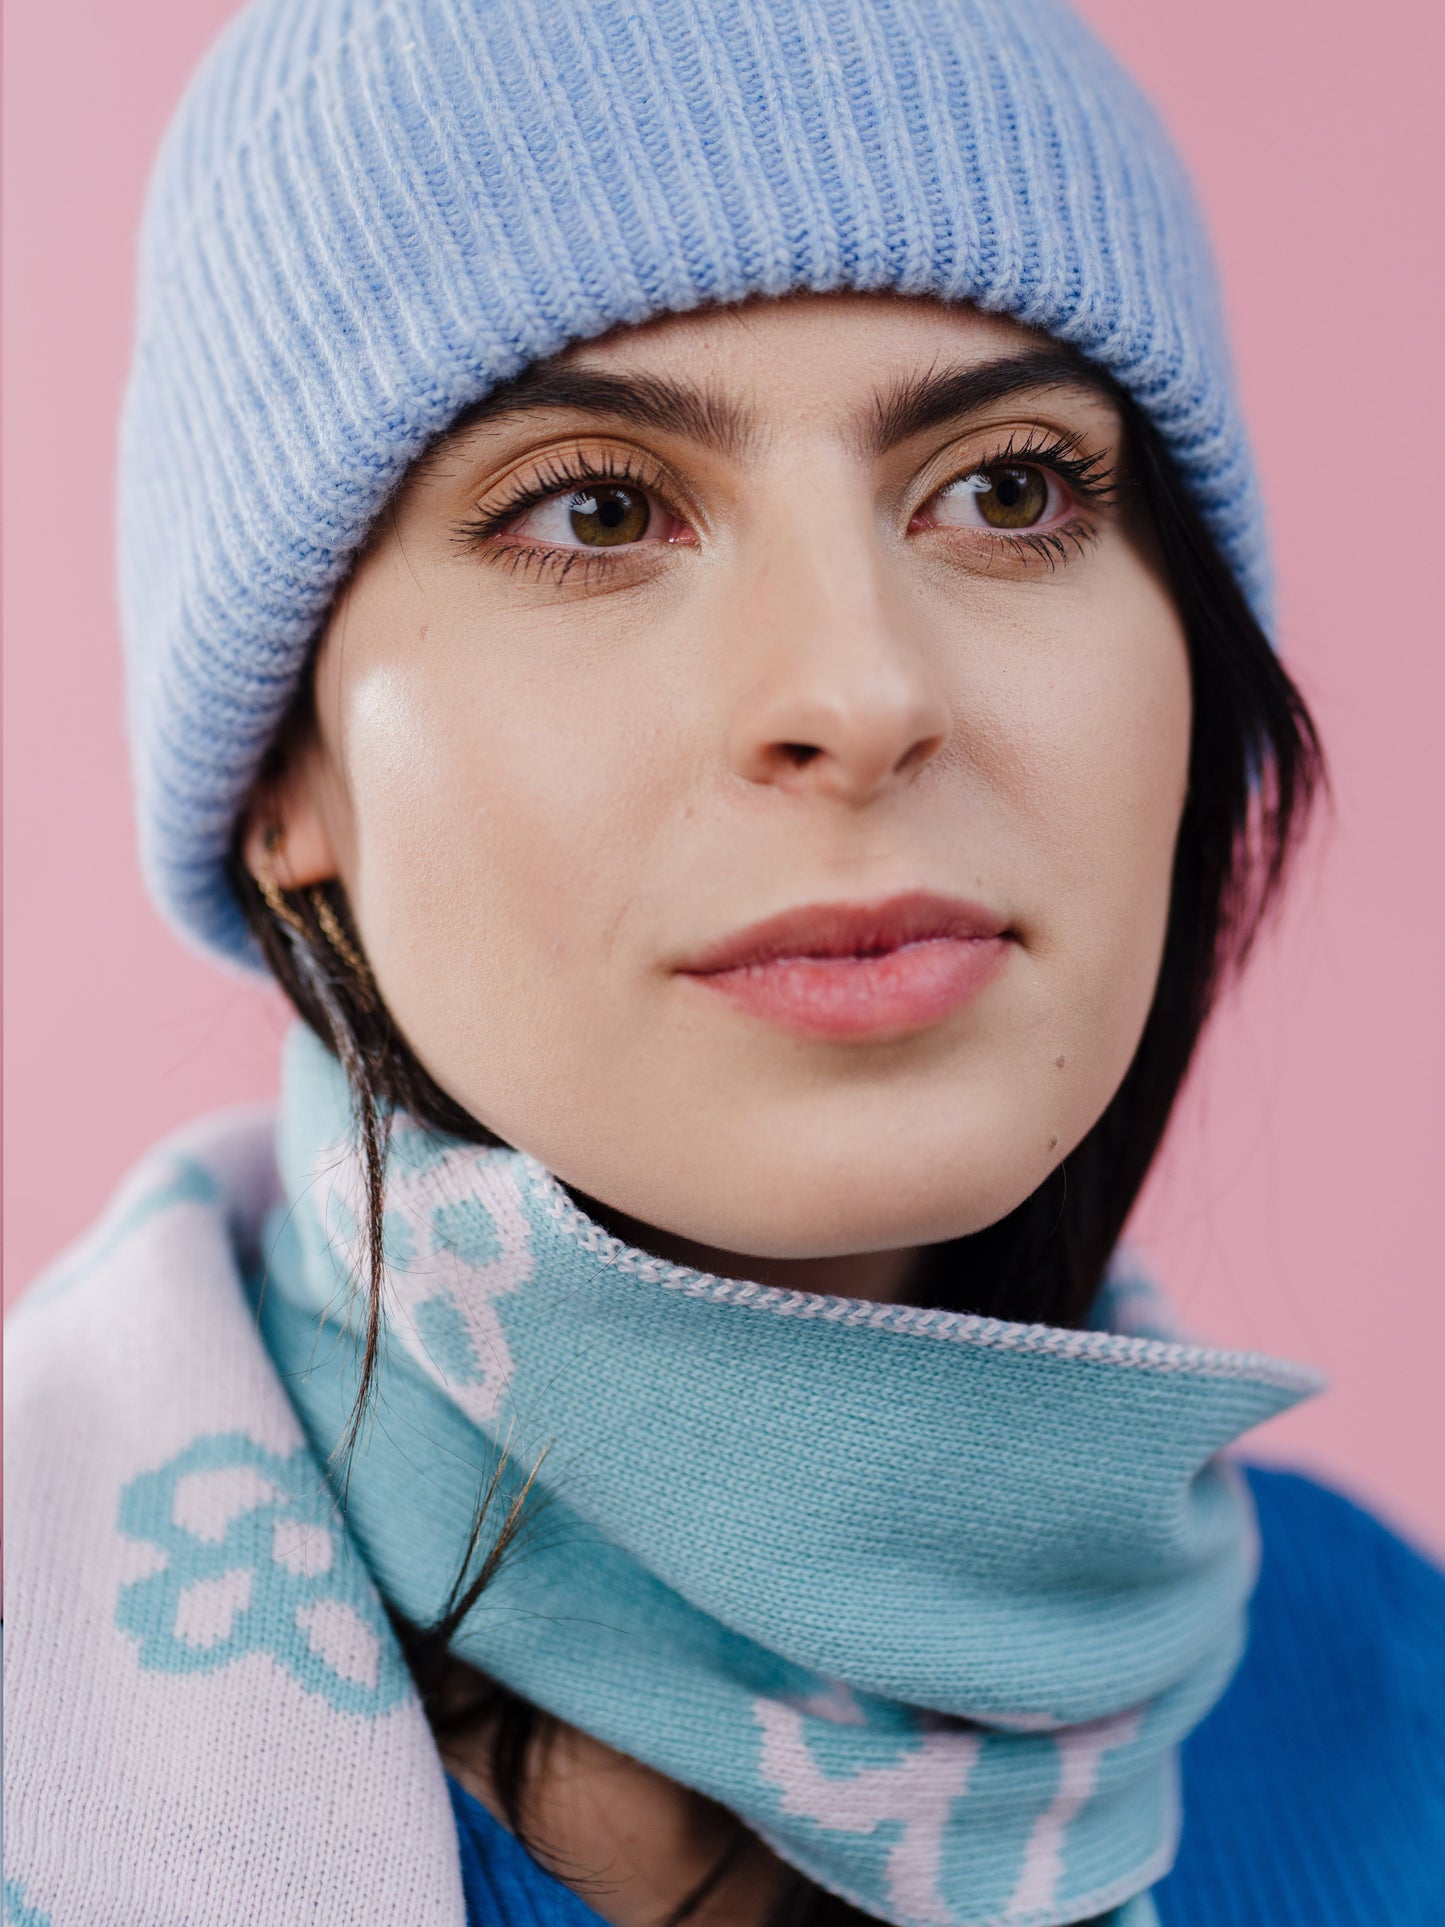 Daisy Wool and Cashmere Scarf in Pink and Blue.  Made to Order